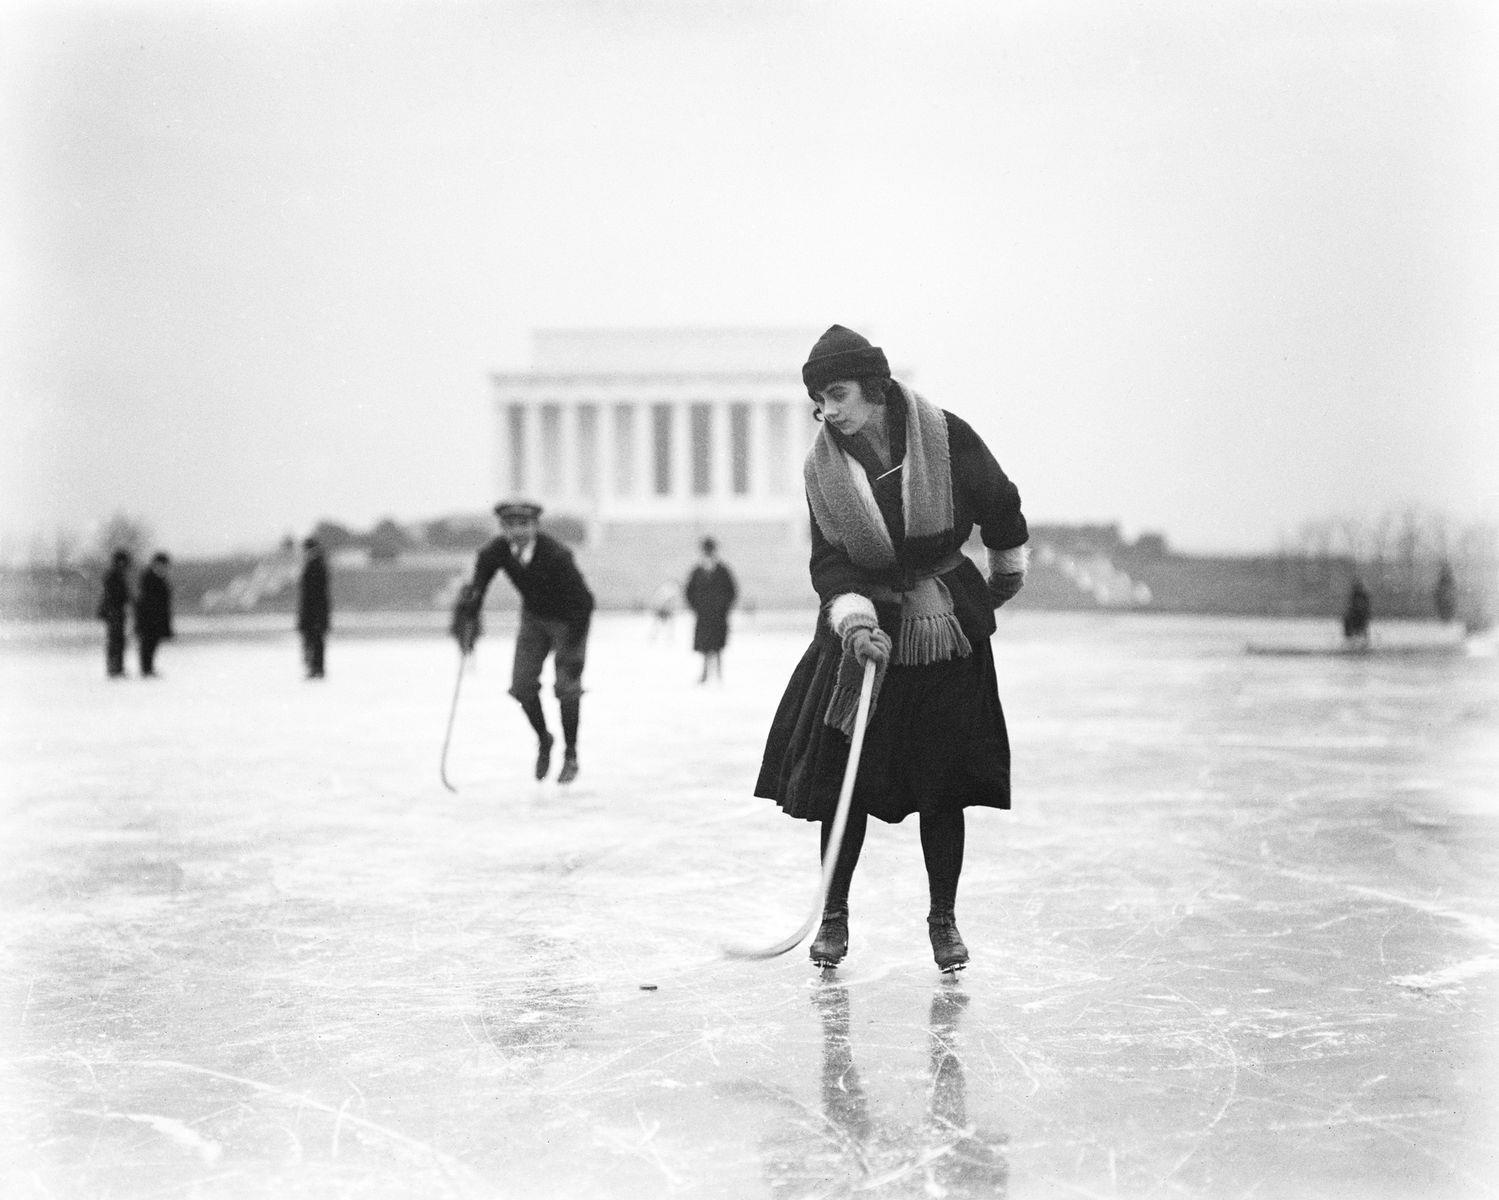 <p>The <a href="https://www.nps.gov/linc/learn/historyculture/lincoln-memorial-important-individuals.htm">Lincoln Memorial</a> in Washington, DC, was built between 1914 and 1922. A dedication ceremony to the 16th president of the United States took place on May 30, 1922.</p>